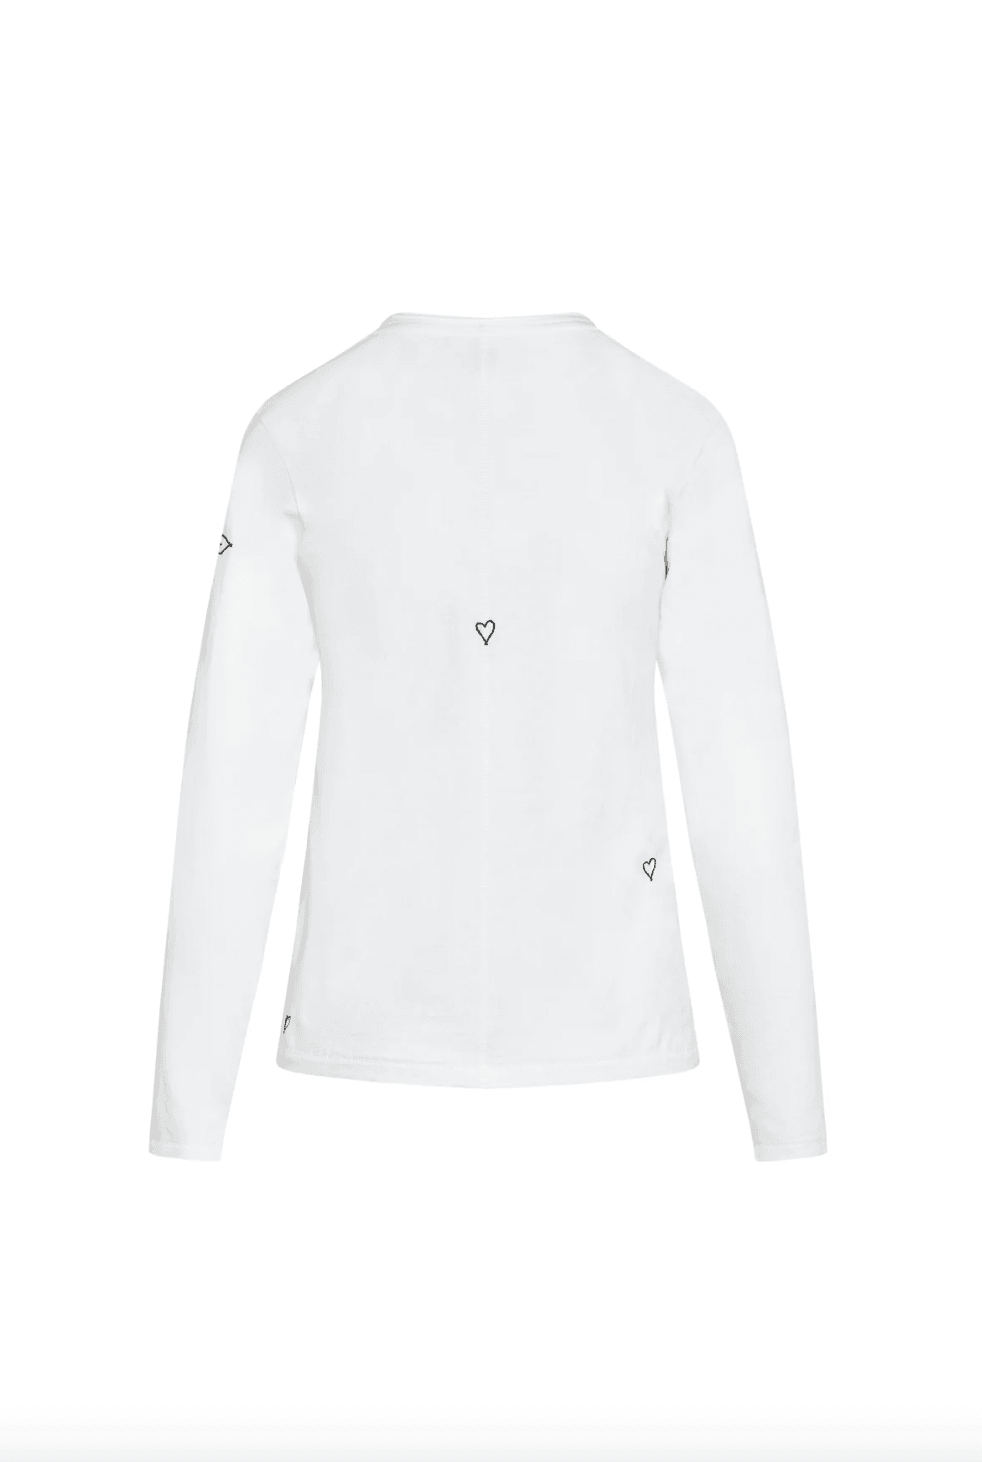 Long Sleeve Embroidered Heart T-Shirt by Catherine Gee - Haven